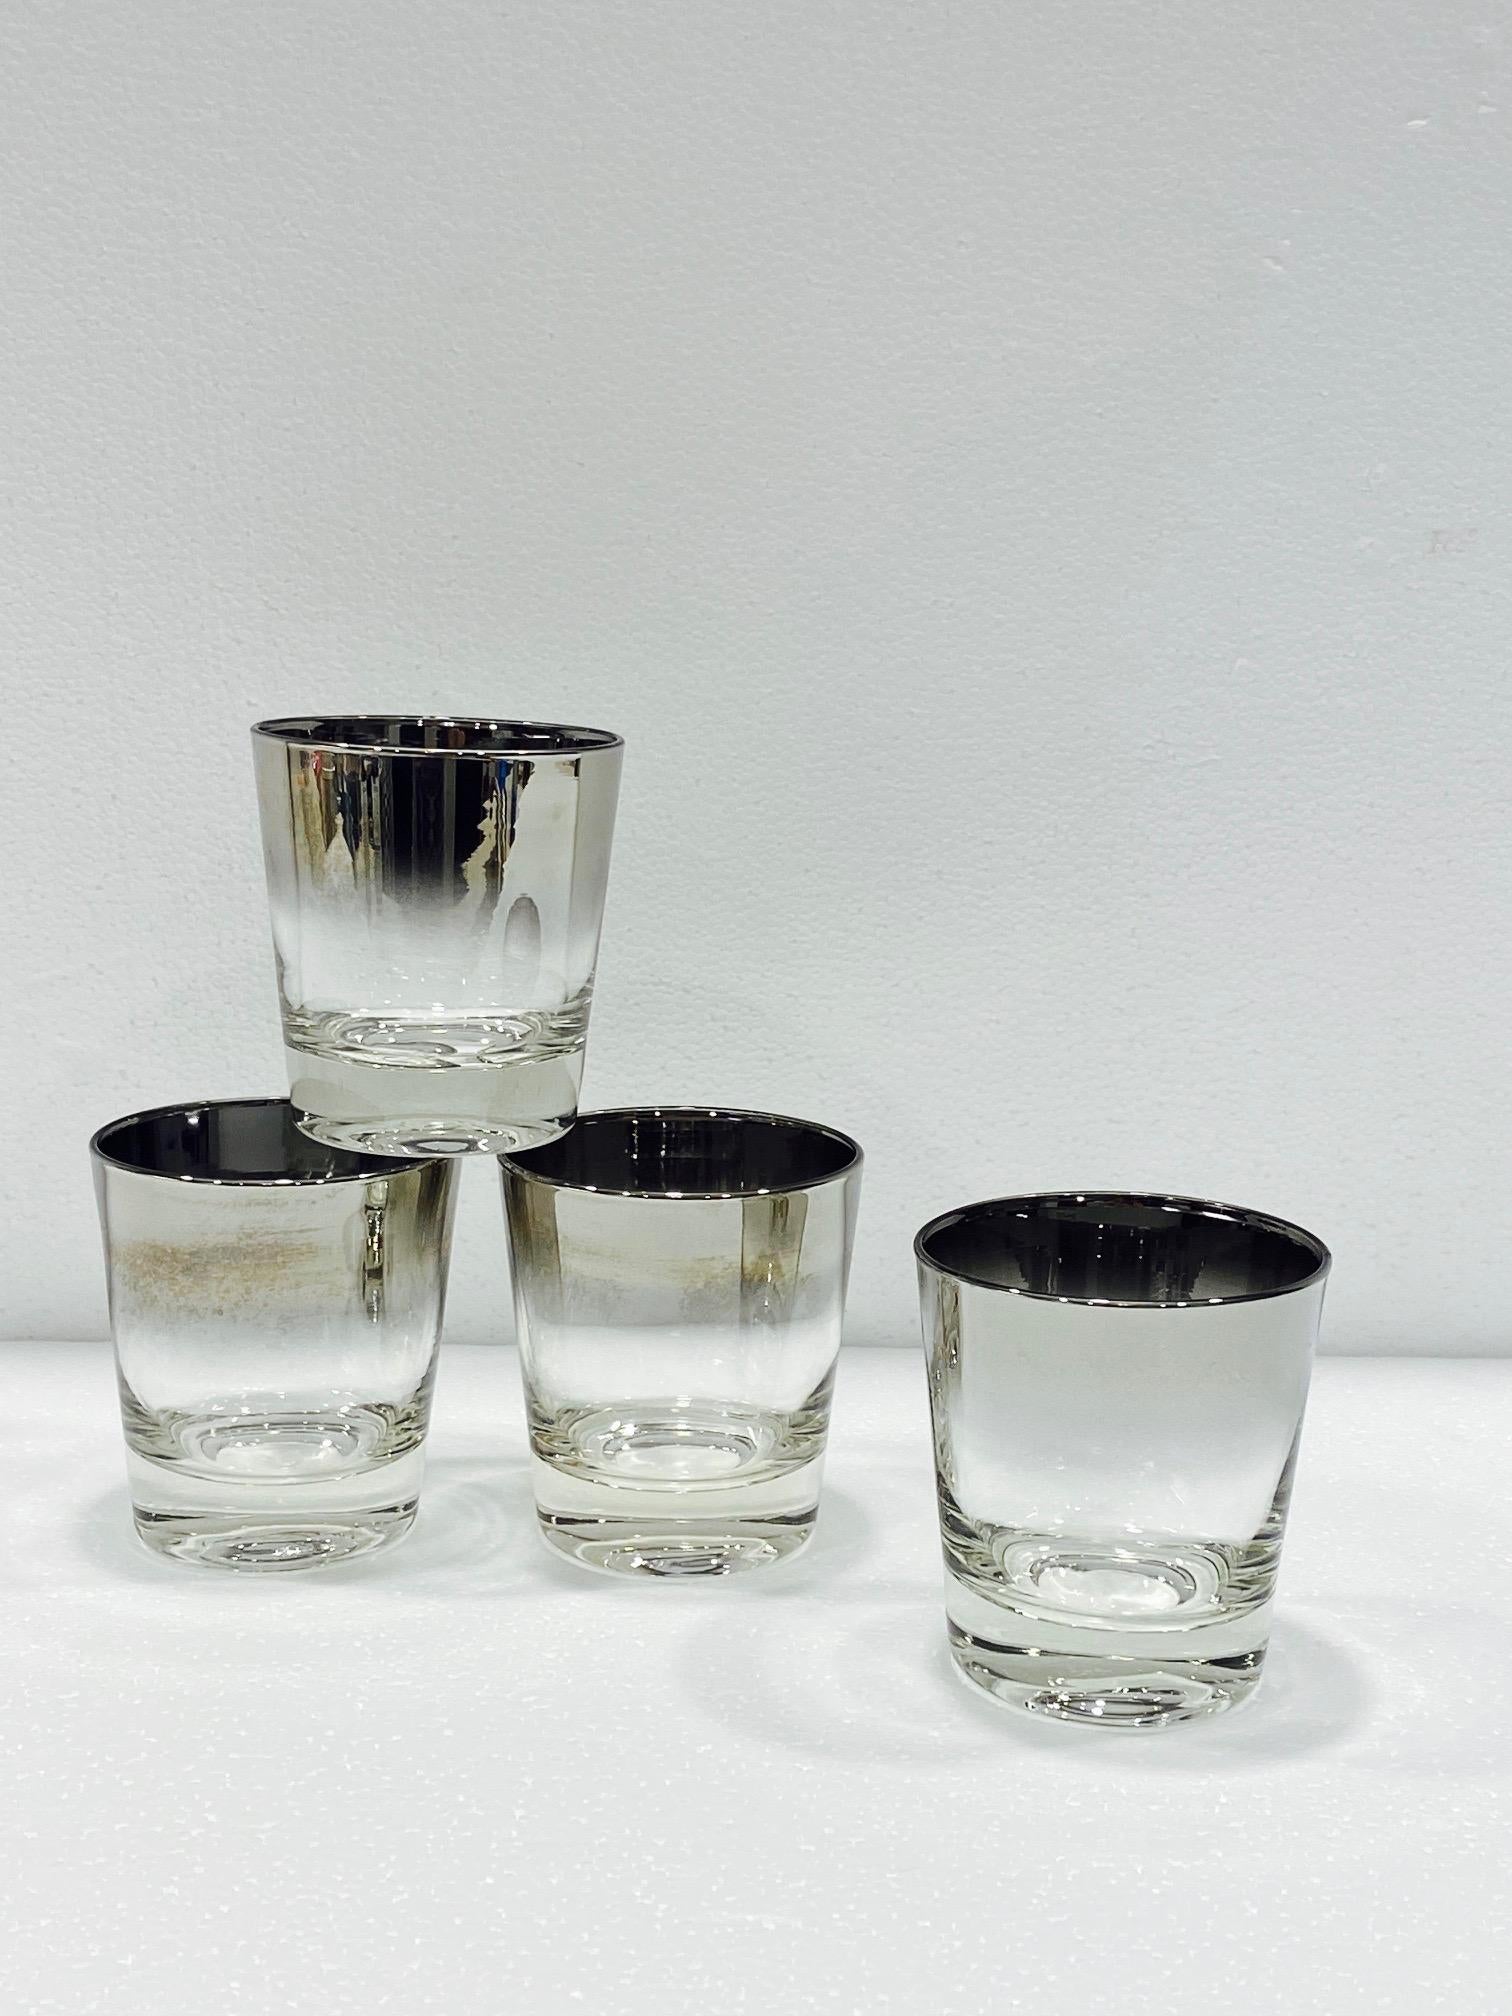 American Set of Four Whiskey Glasses with Silver Overlay by Dorothy Thorpe, circa 1960s